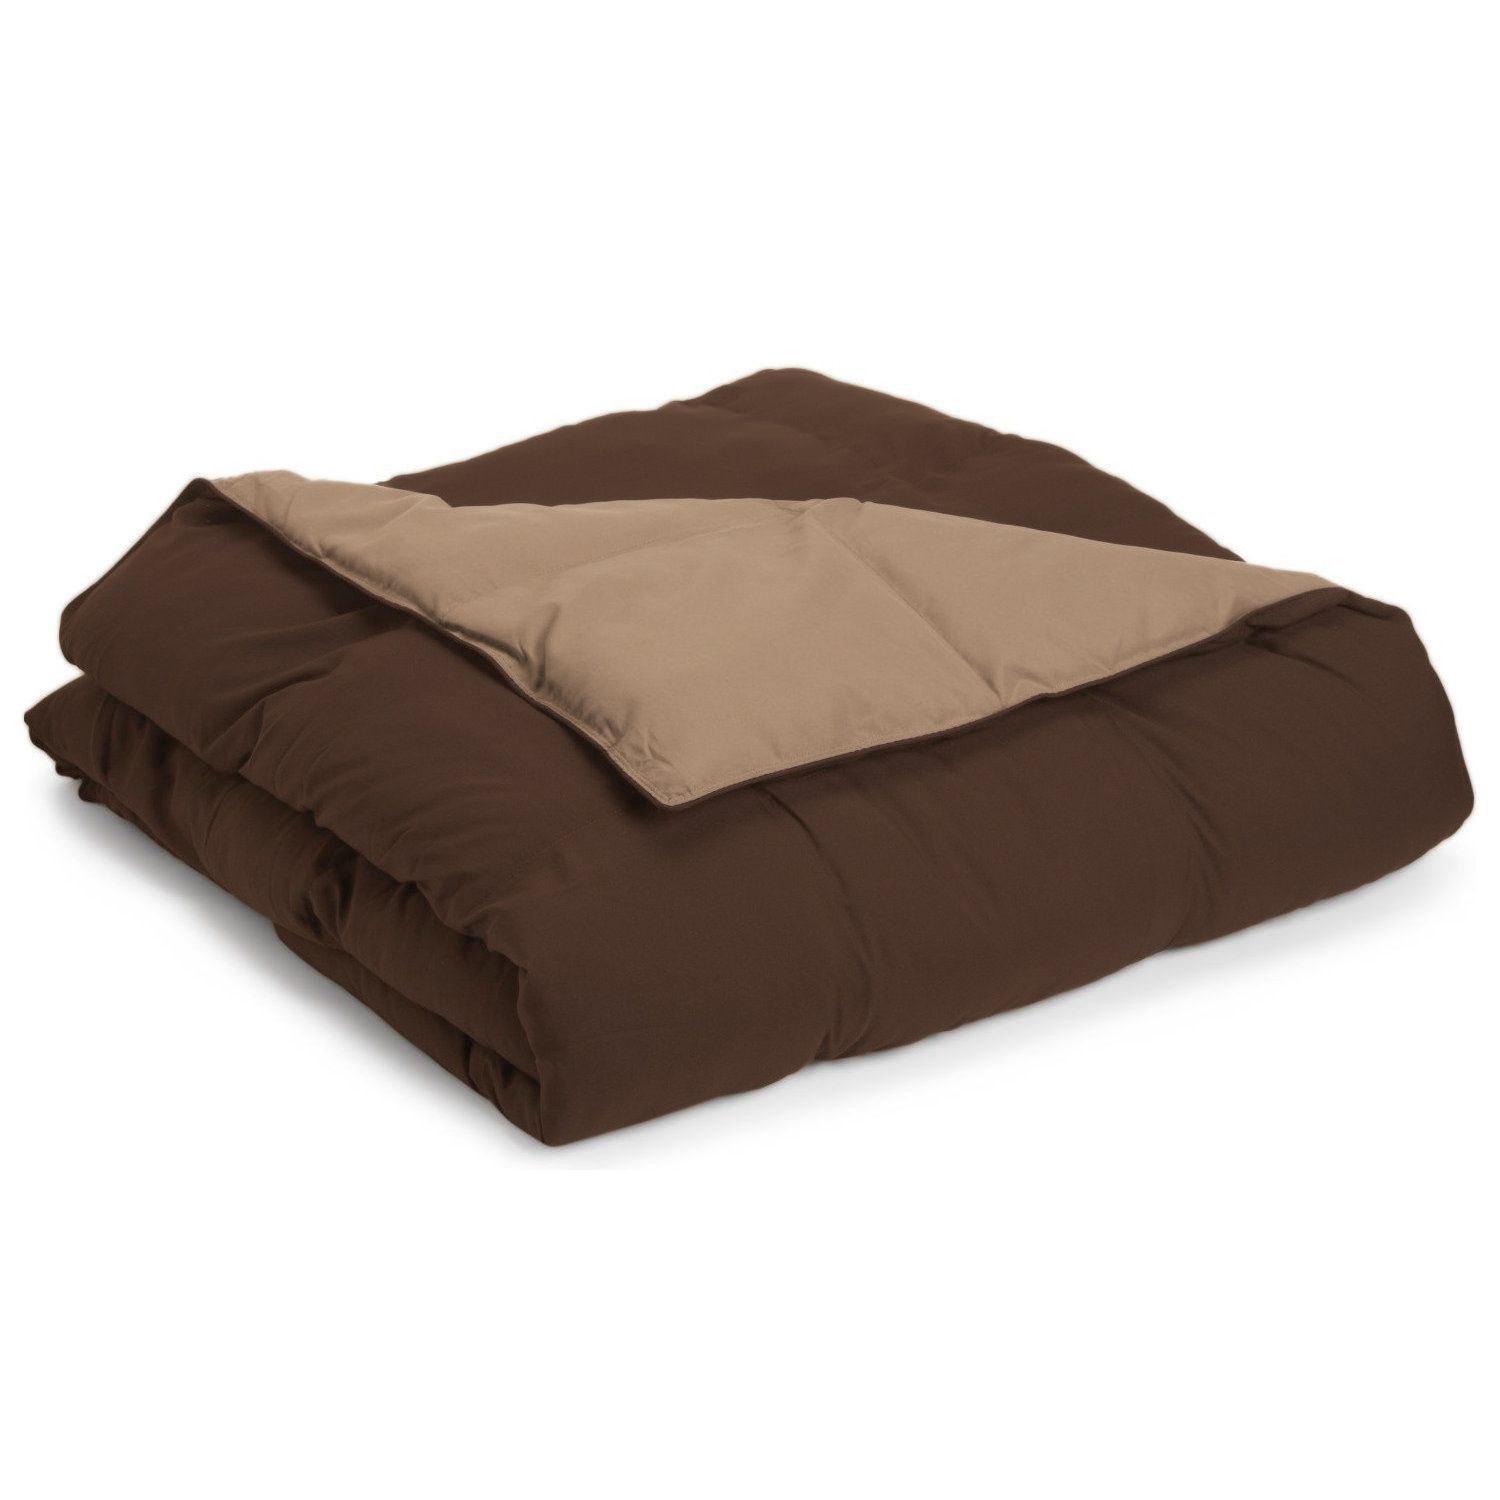 Superior Down Alternative Reversible Comforter, King, Taupe/ Choco - image 1 of 3